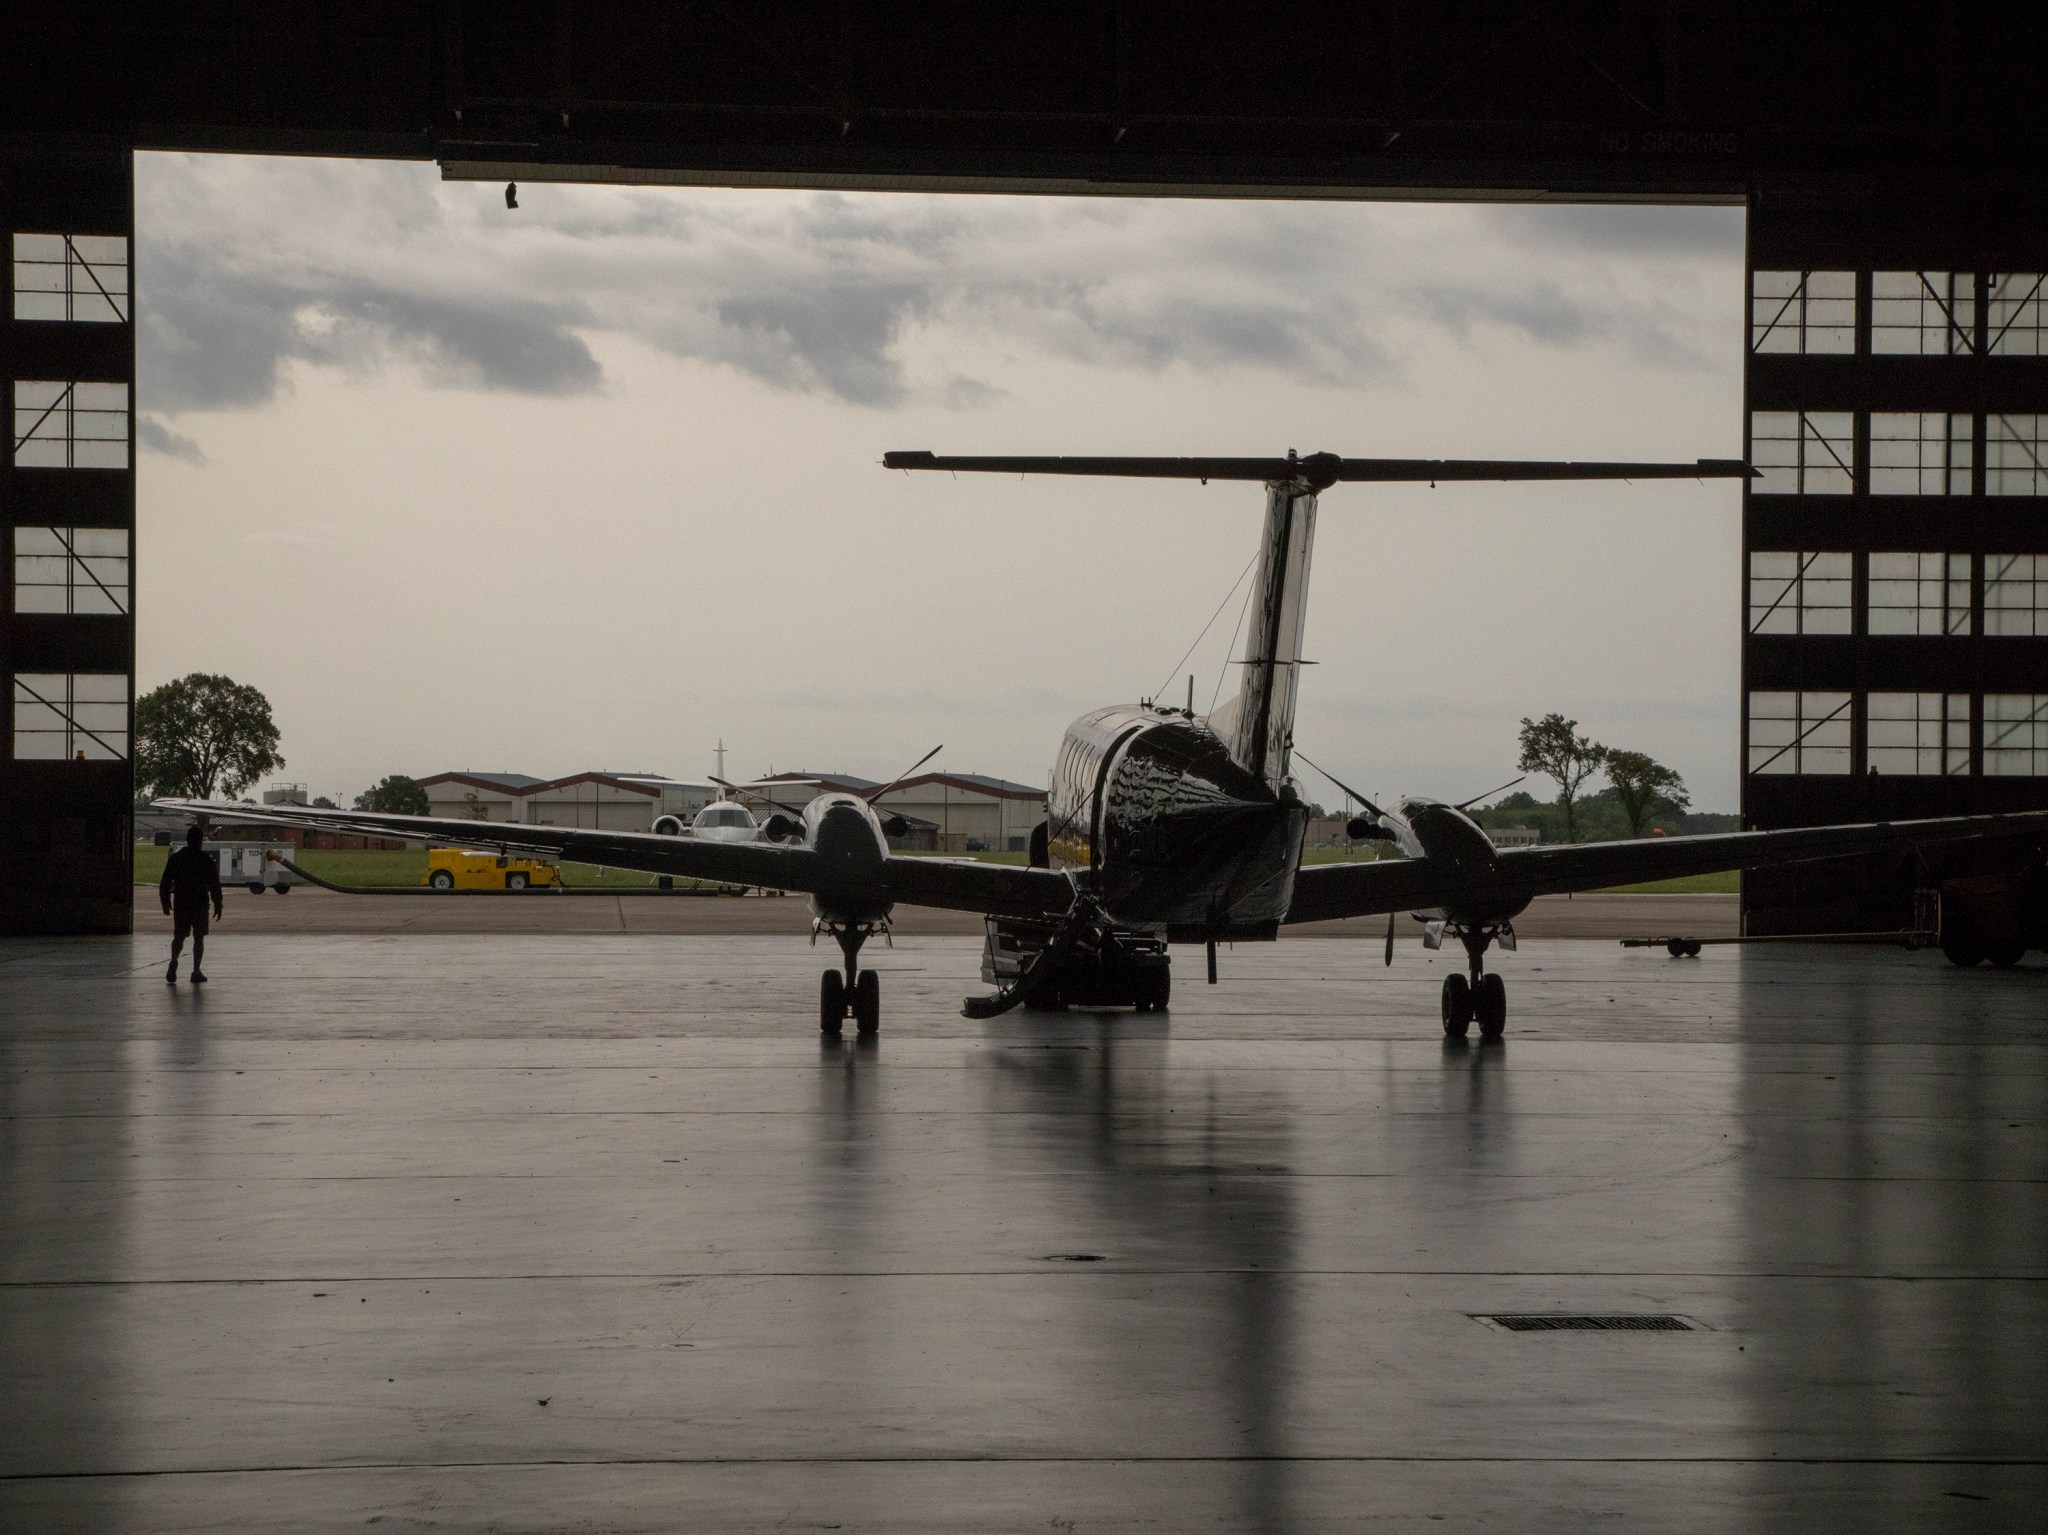 The King Air rolls out of the hangar